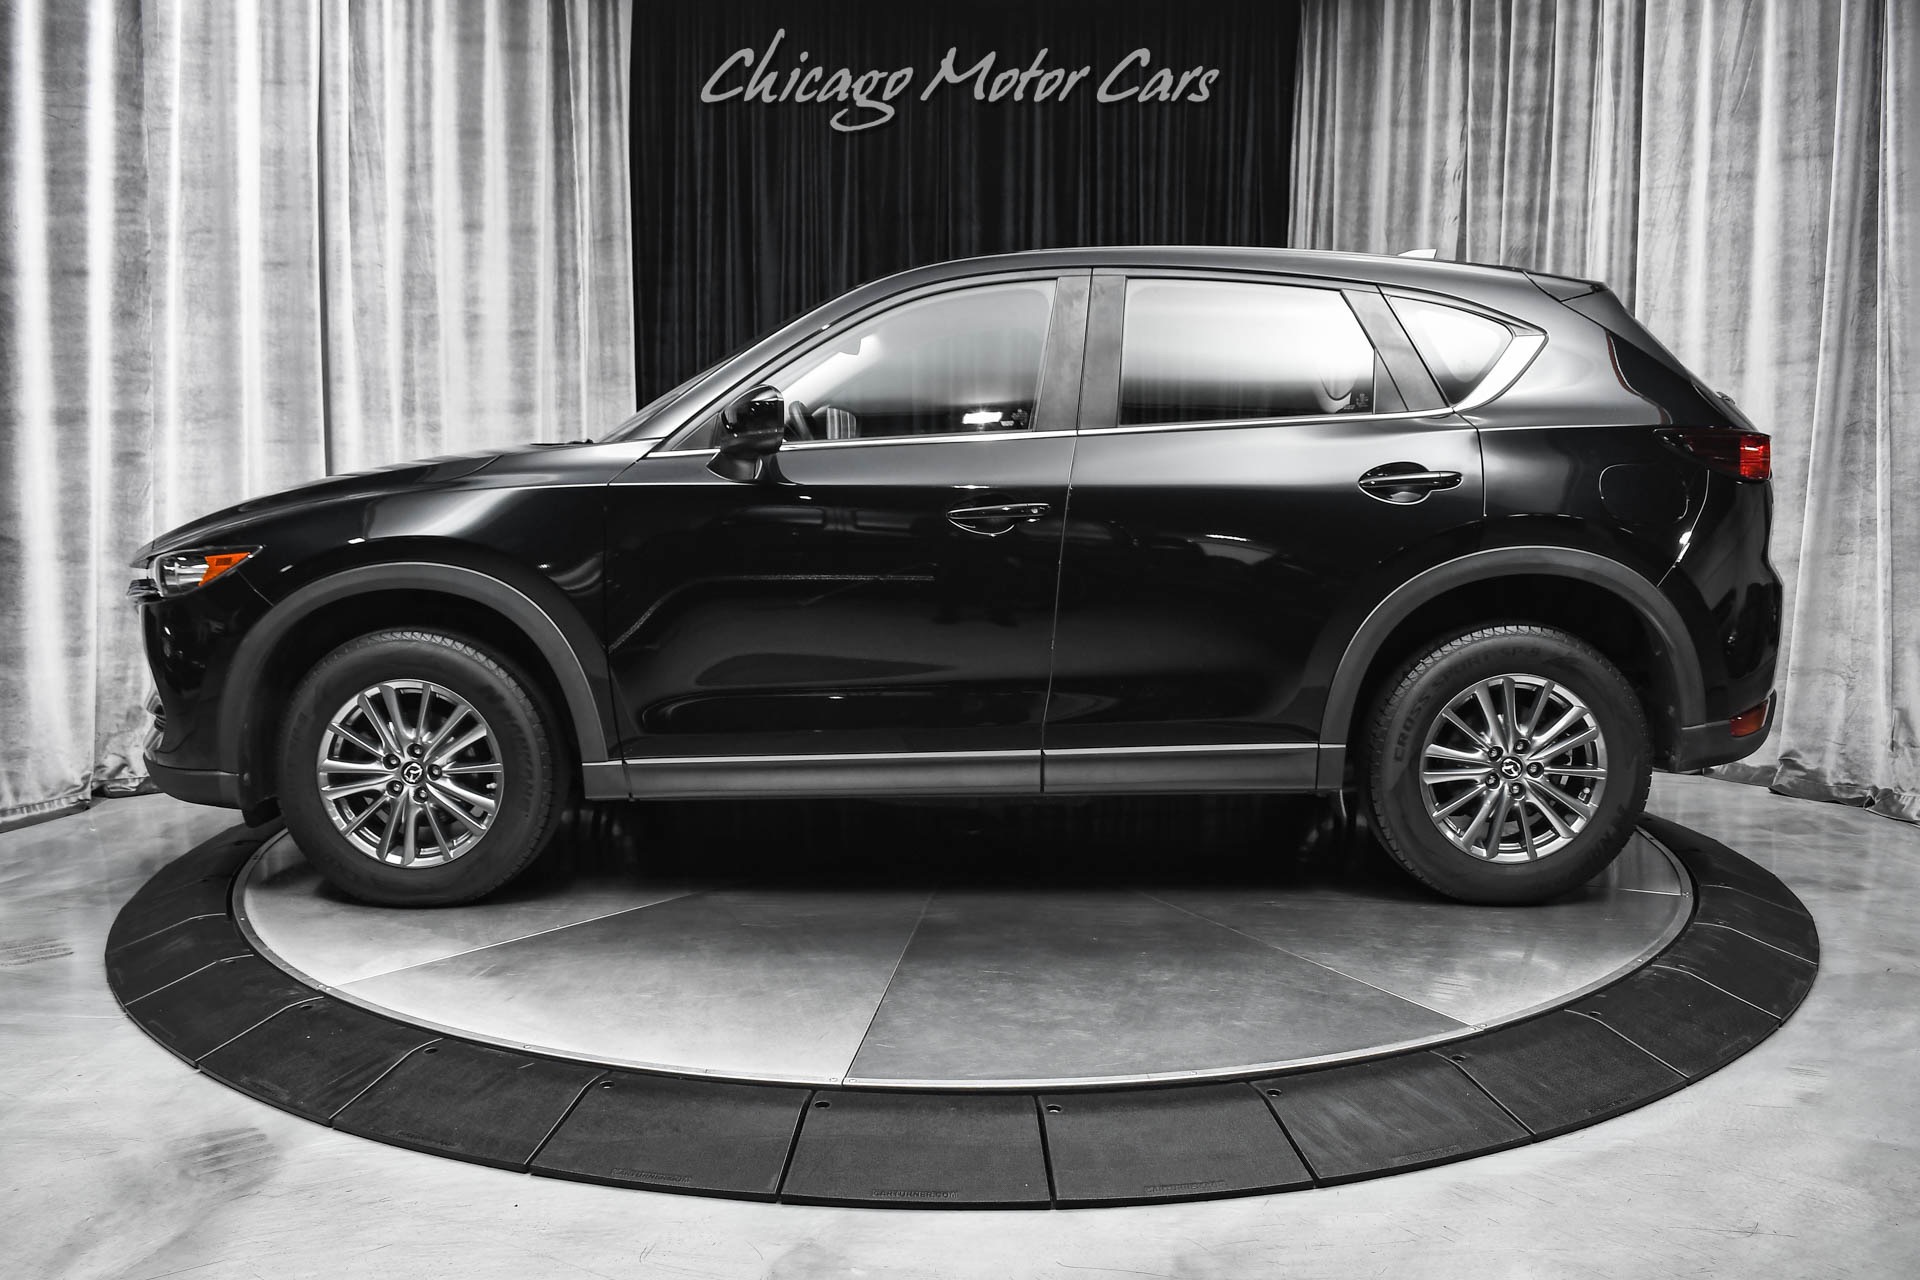 Used-2017-Mazda-CX-5-Sport-SUV-Jet-Black-Mica-Navigation-Well-Equipped-Excellent-Daily-Driver